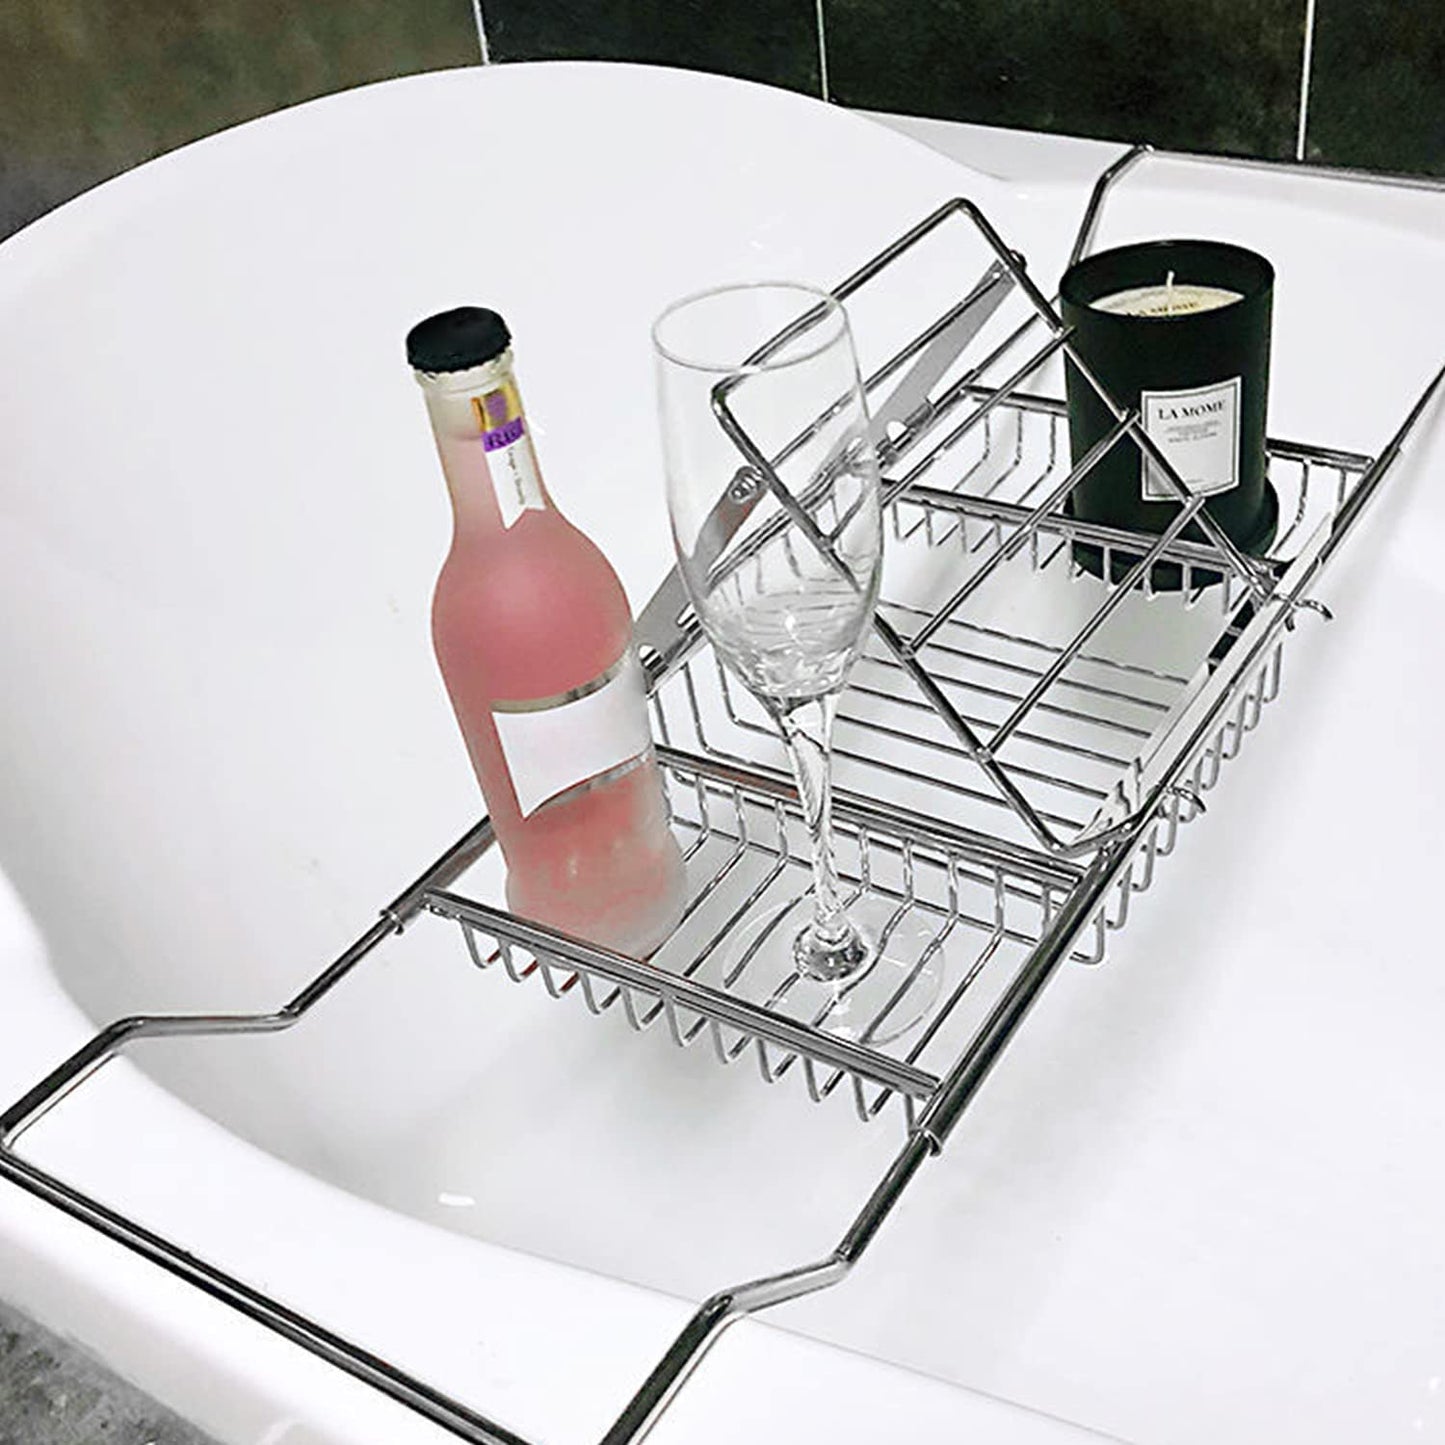 Insputer Stainless Steel Bathtub Caddy Tray, Expandable Bath Tub Tray Racks Shower Organizer for Luxury Bathroom with iPad Book Holder&Removable Wine Glass Holder Bath Accessories